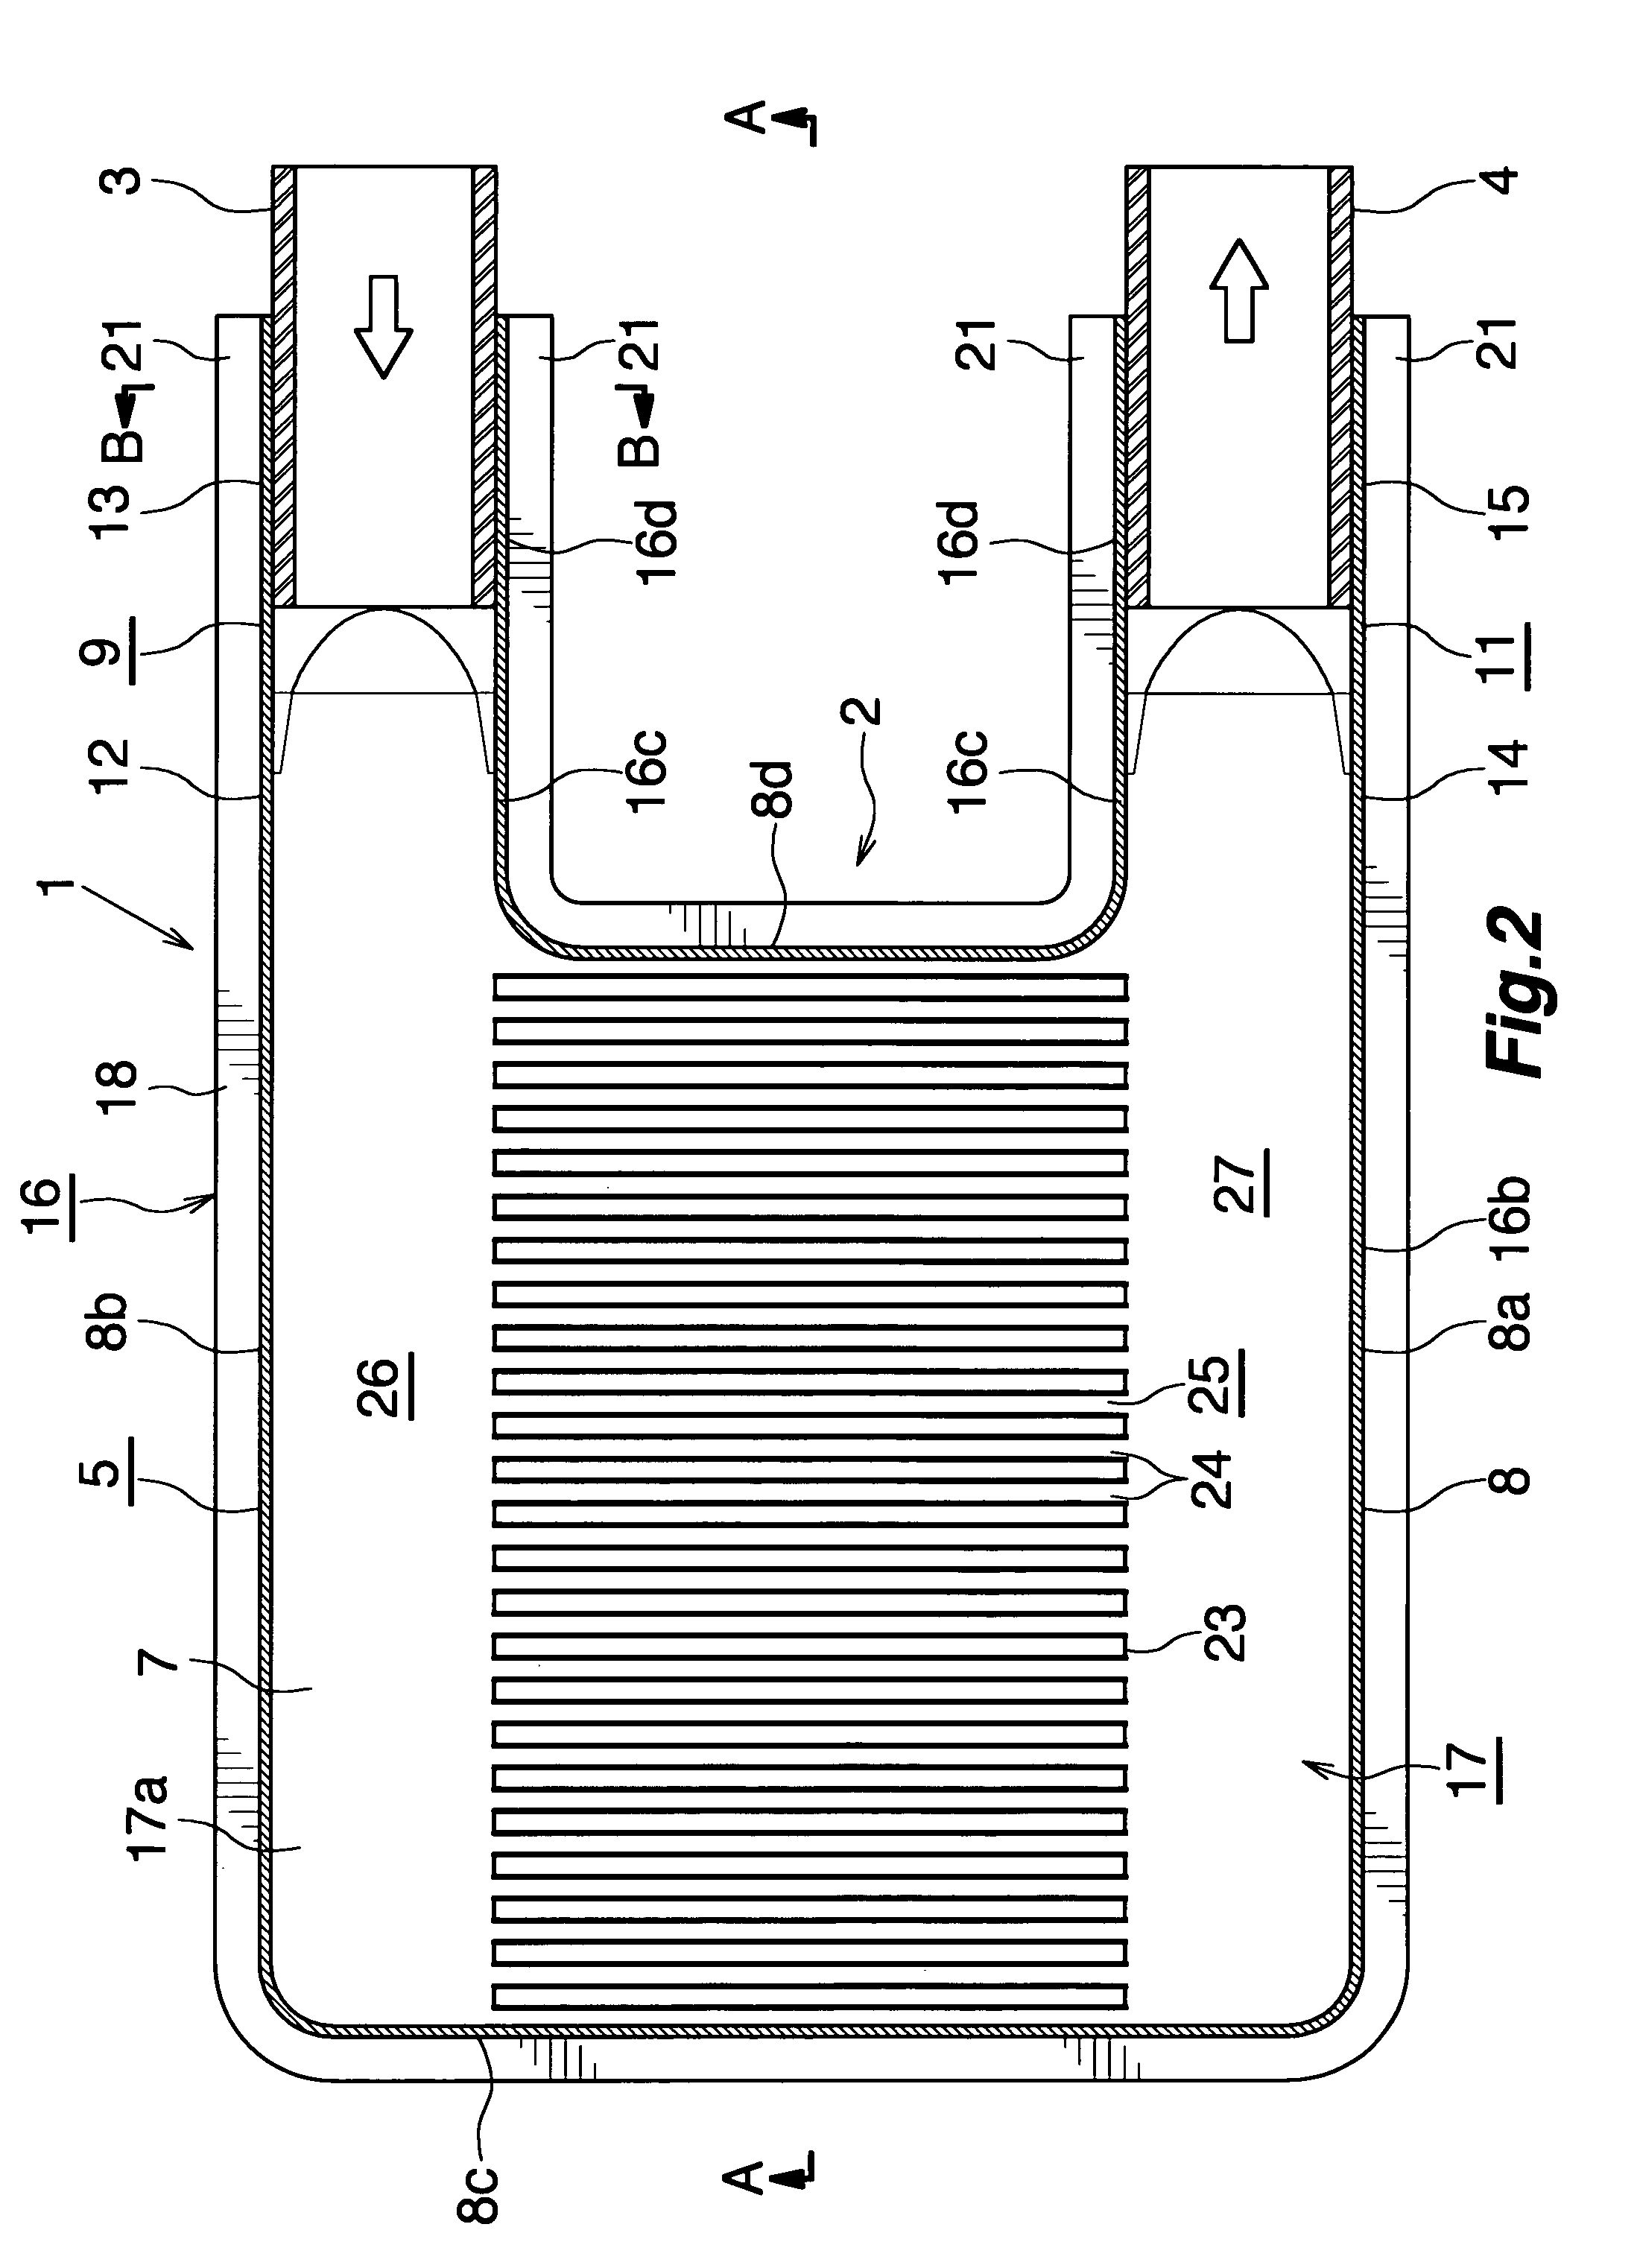 Method of manufacturing a pipe coupling component